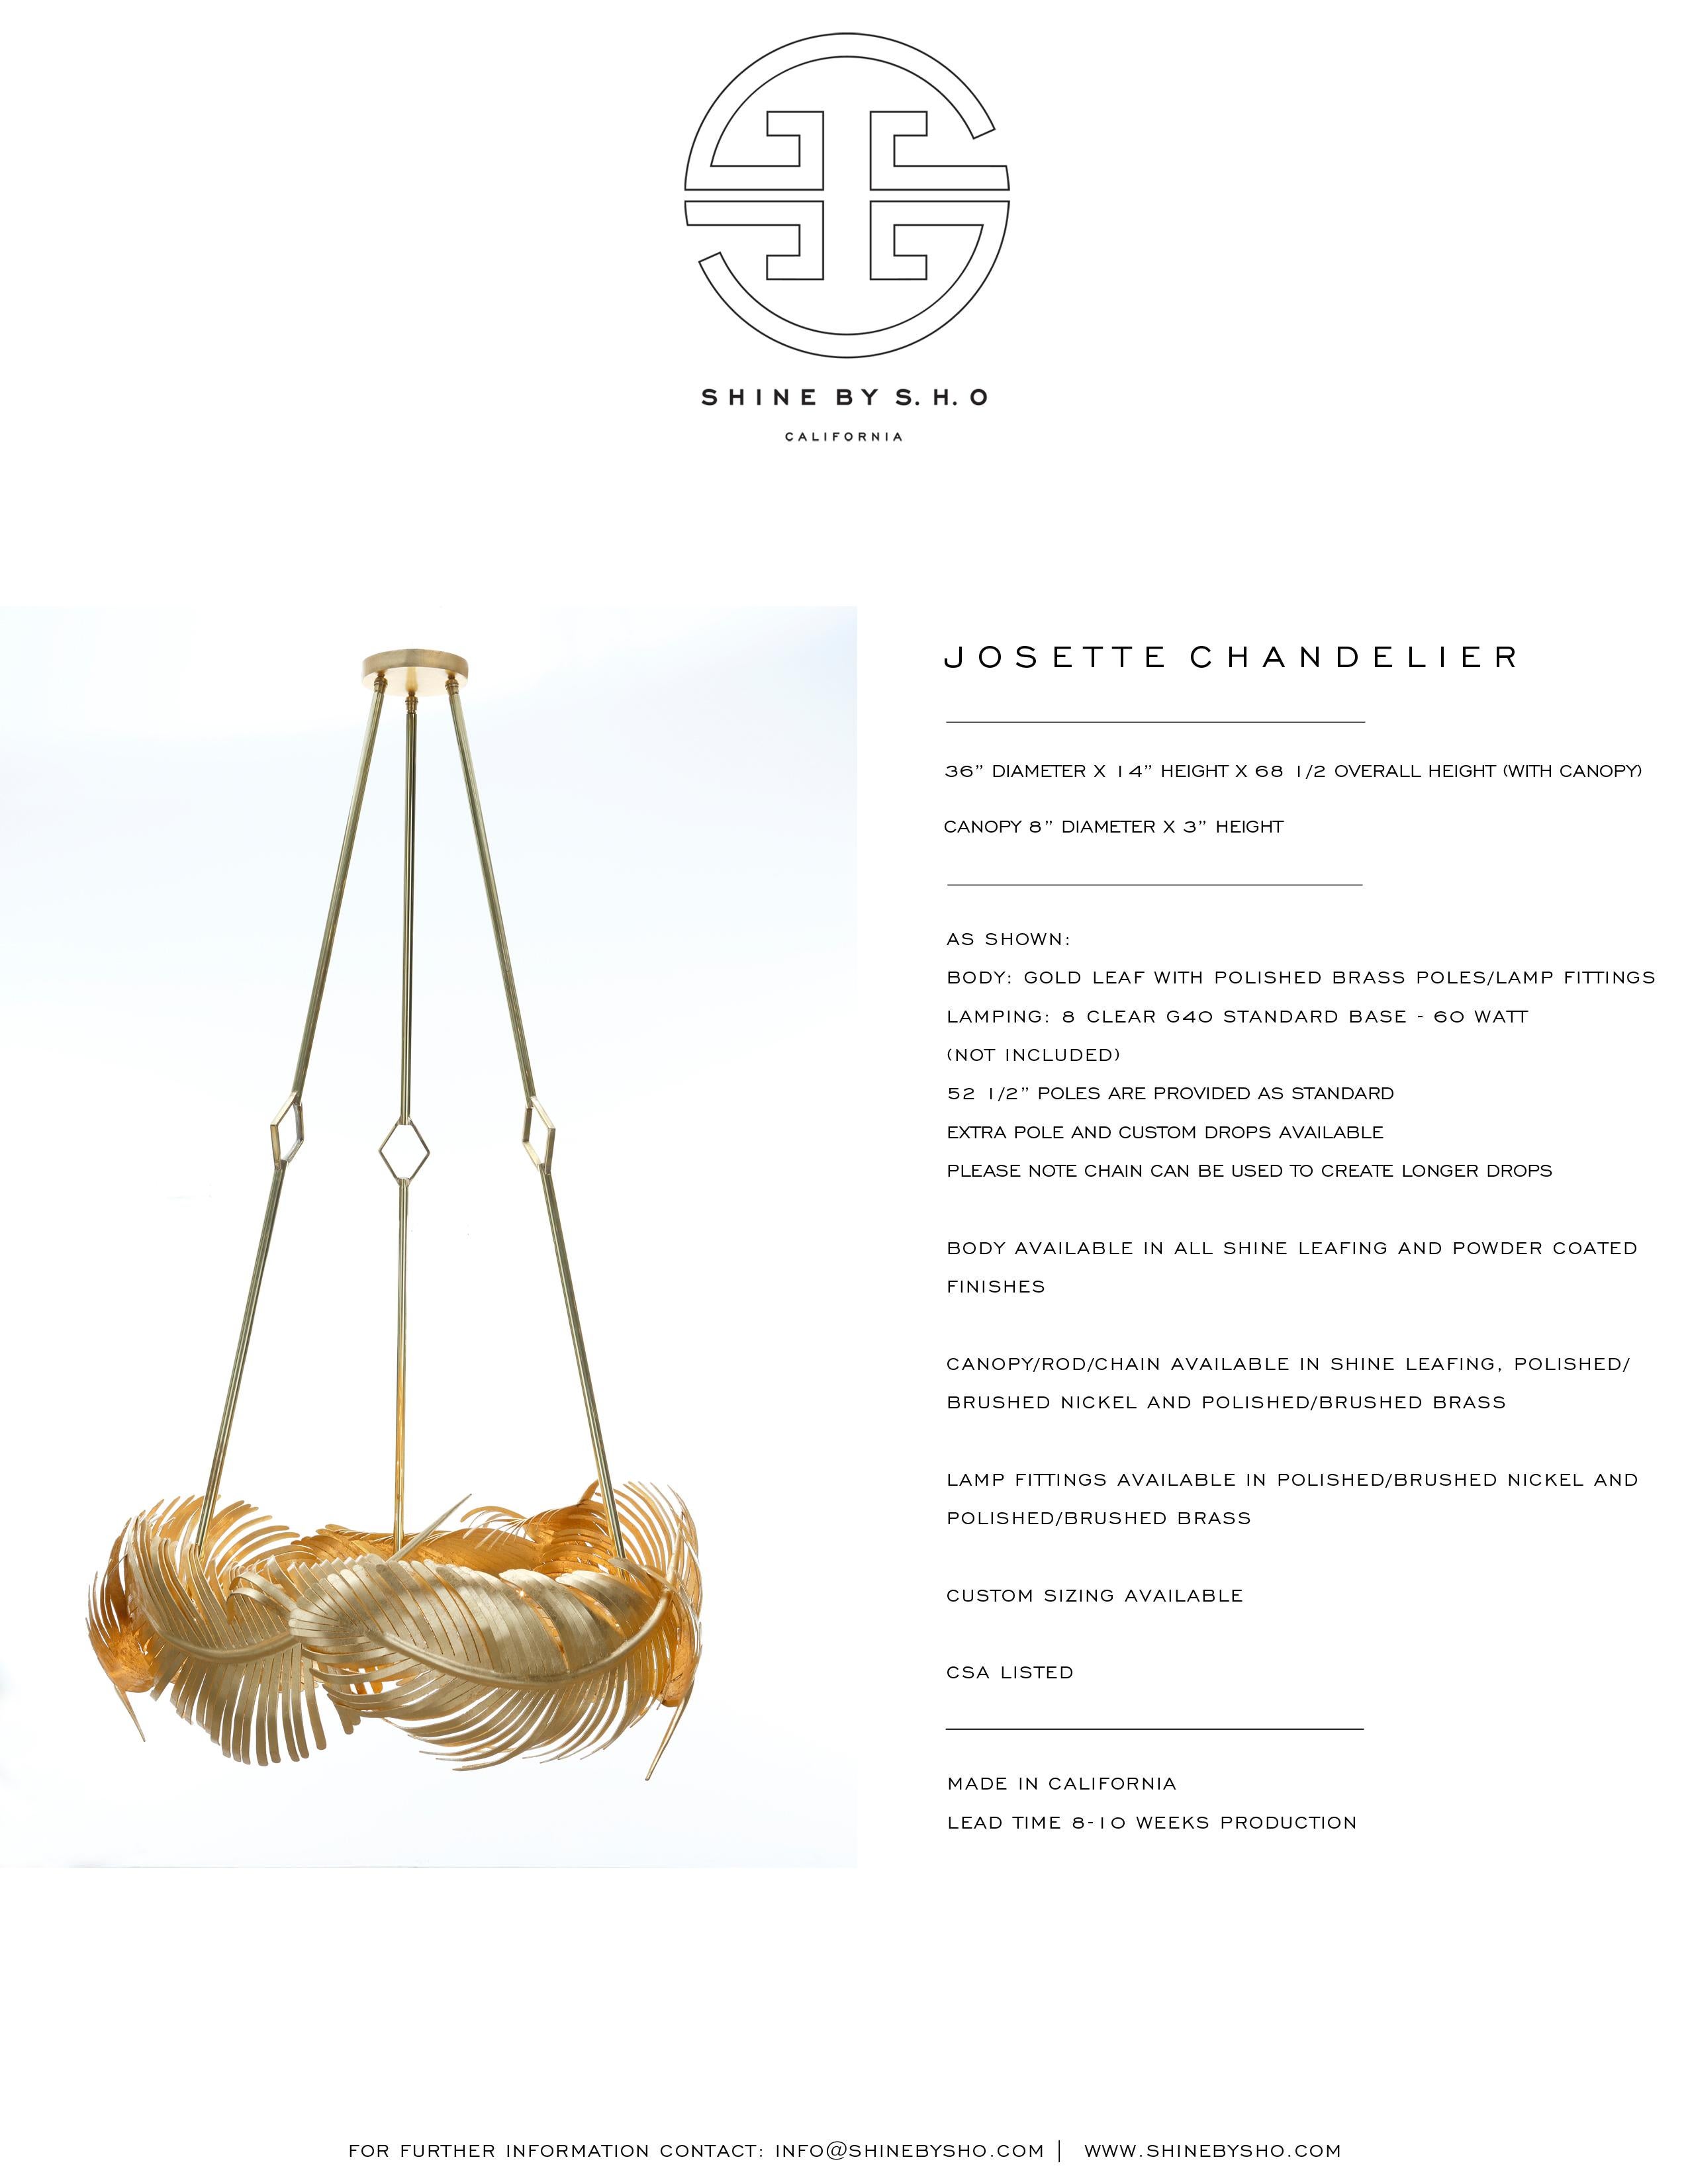 American JOSSETTE CHANDELIER - Gold Leafed Feathers For Sale